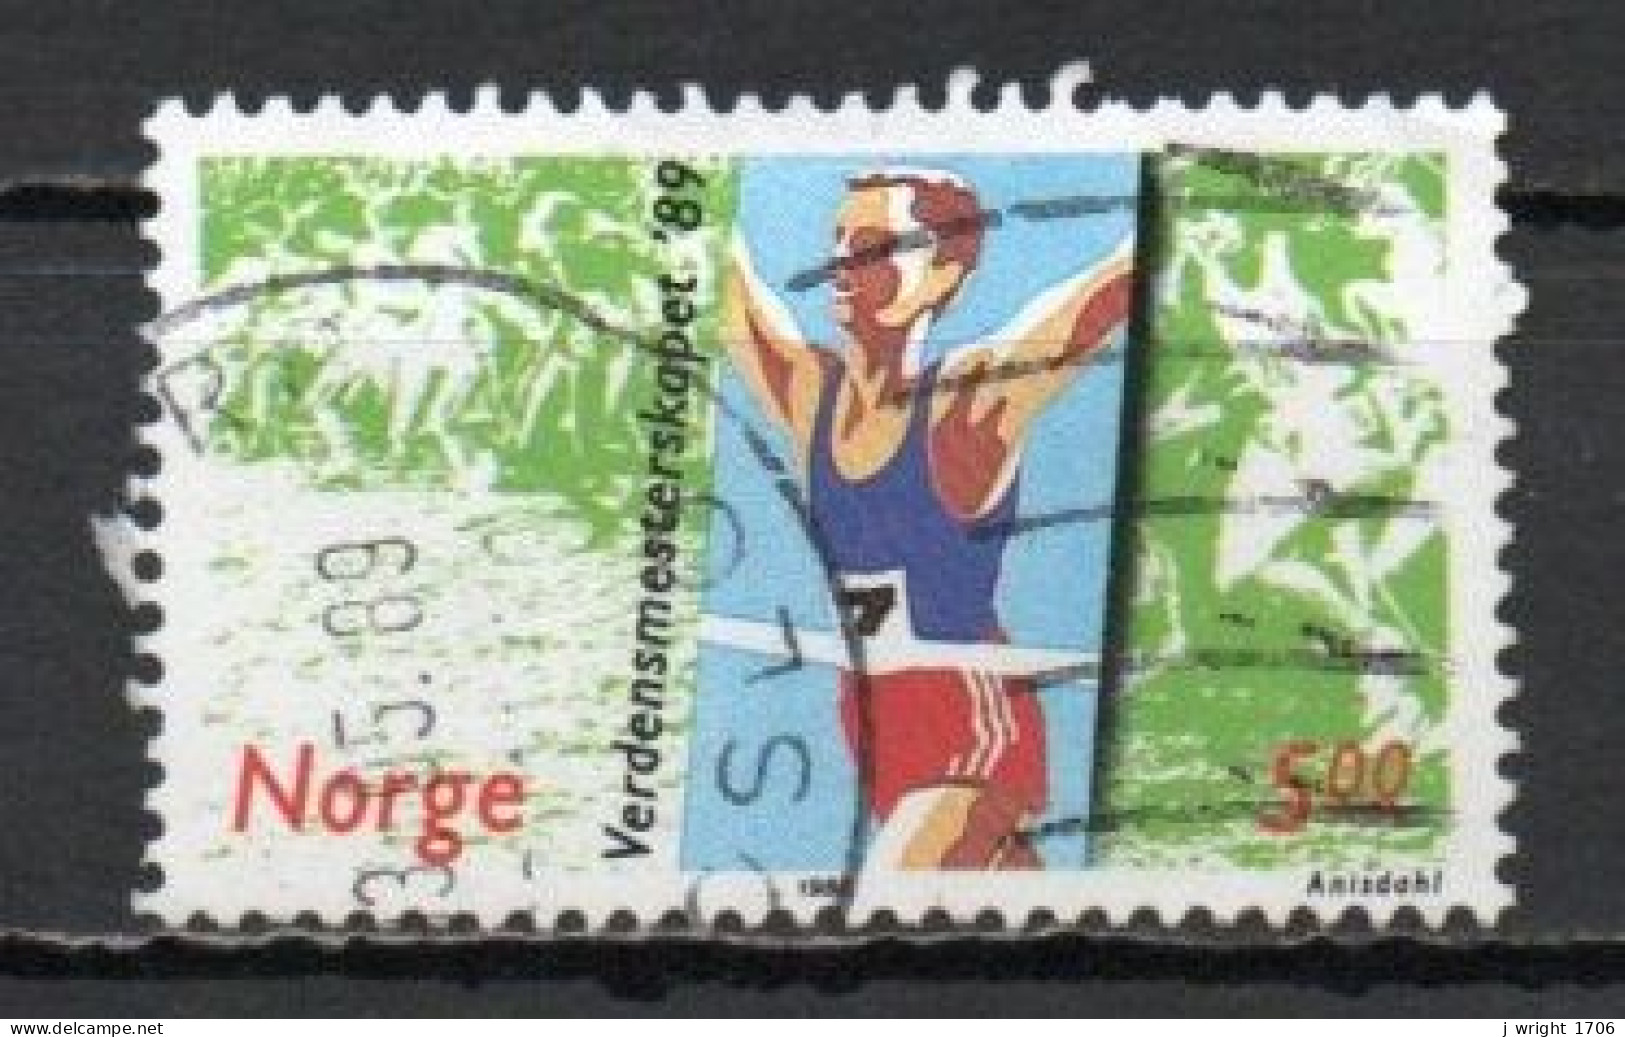 Norway, 1989, World Cross Country Championships, 5kr, USED - Usati